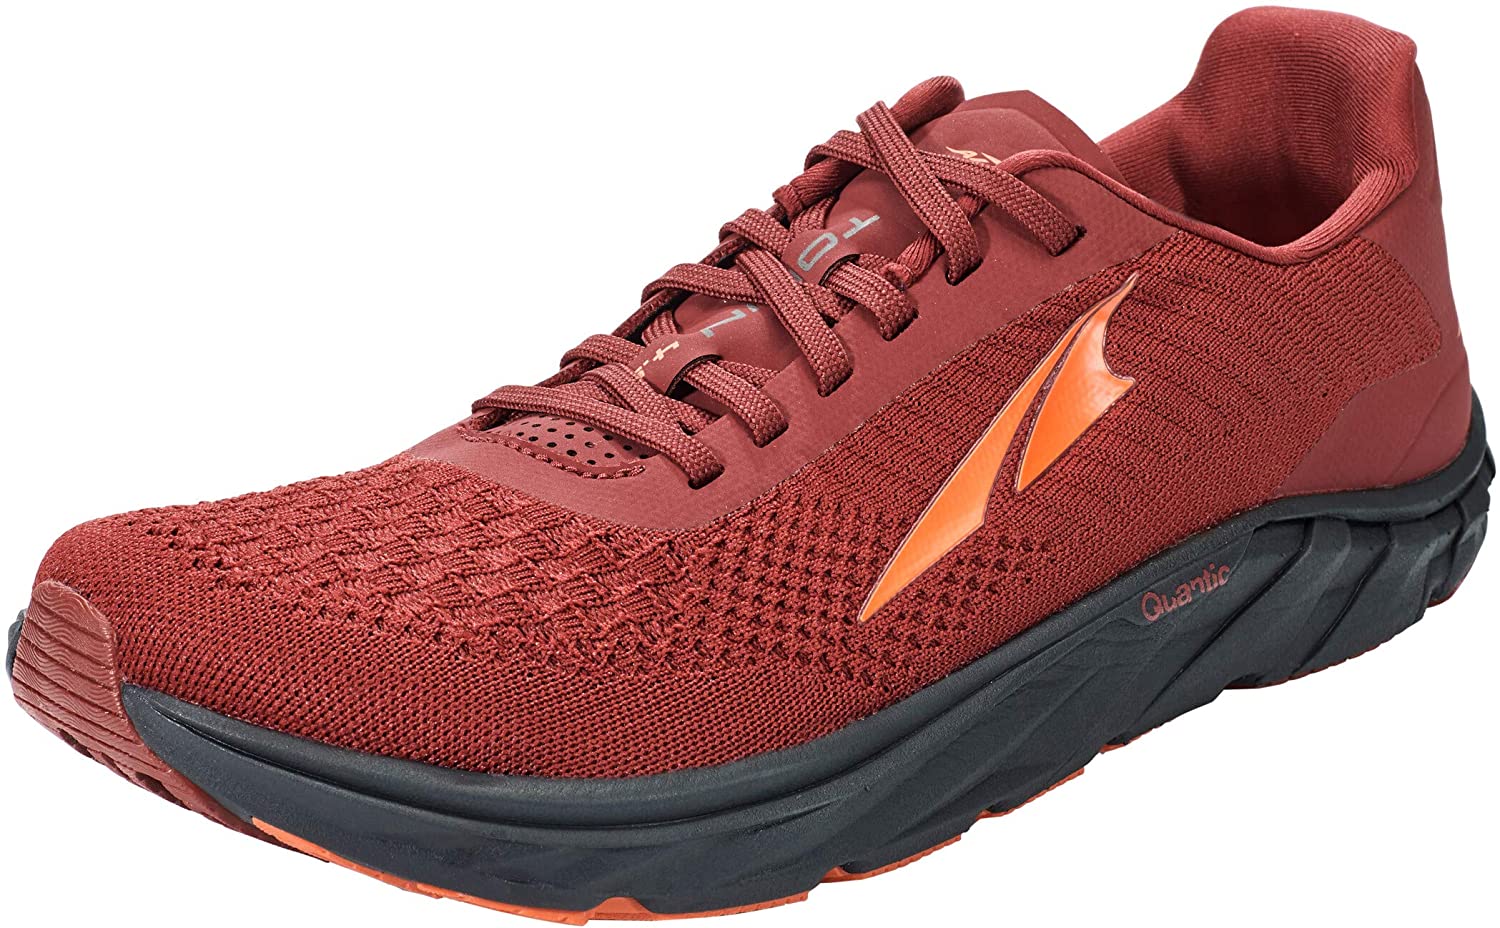 Altra Men's Torin 4.5 Plush Road Running Shoe in Dark Red from the side